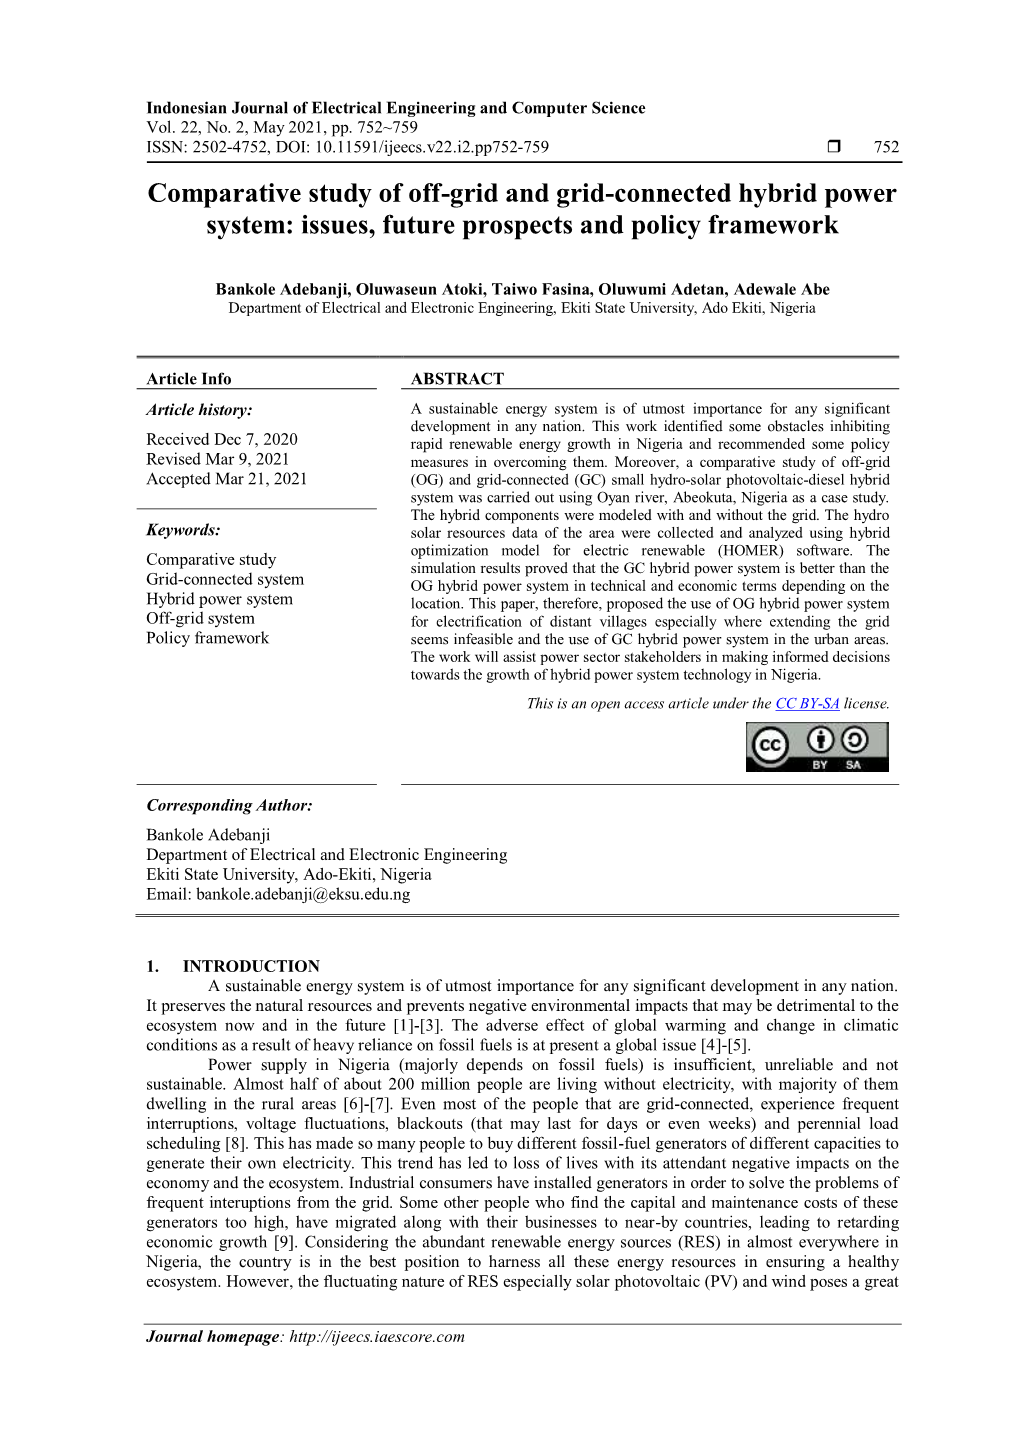 Comparative Study of Off-Grid and Grid-Connected Hybrid Power System: Issues, Future Prospects and Policy Framework